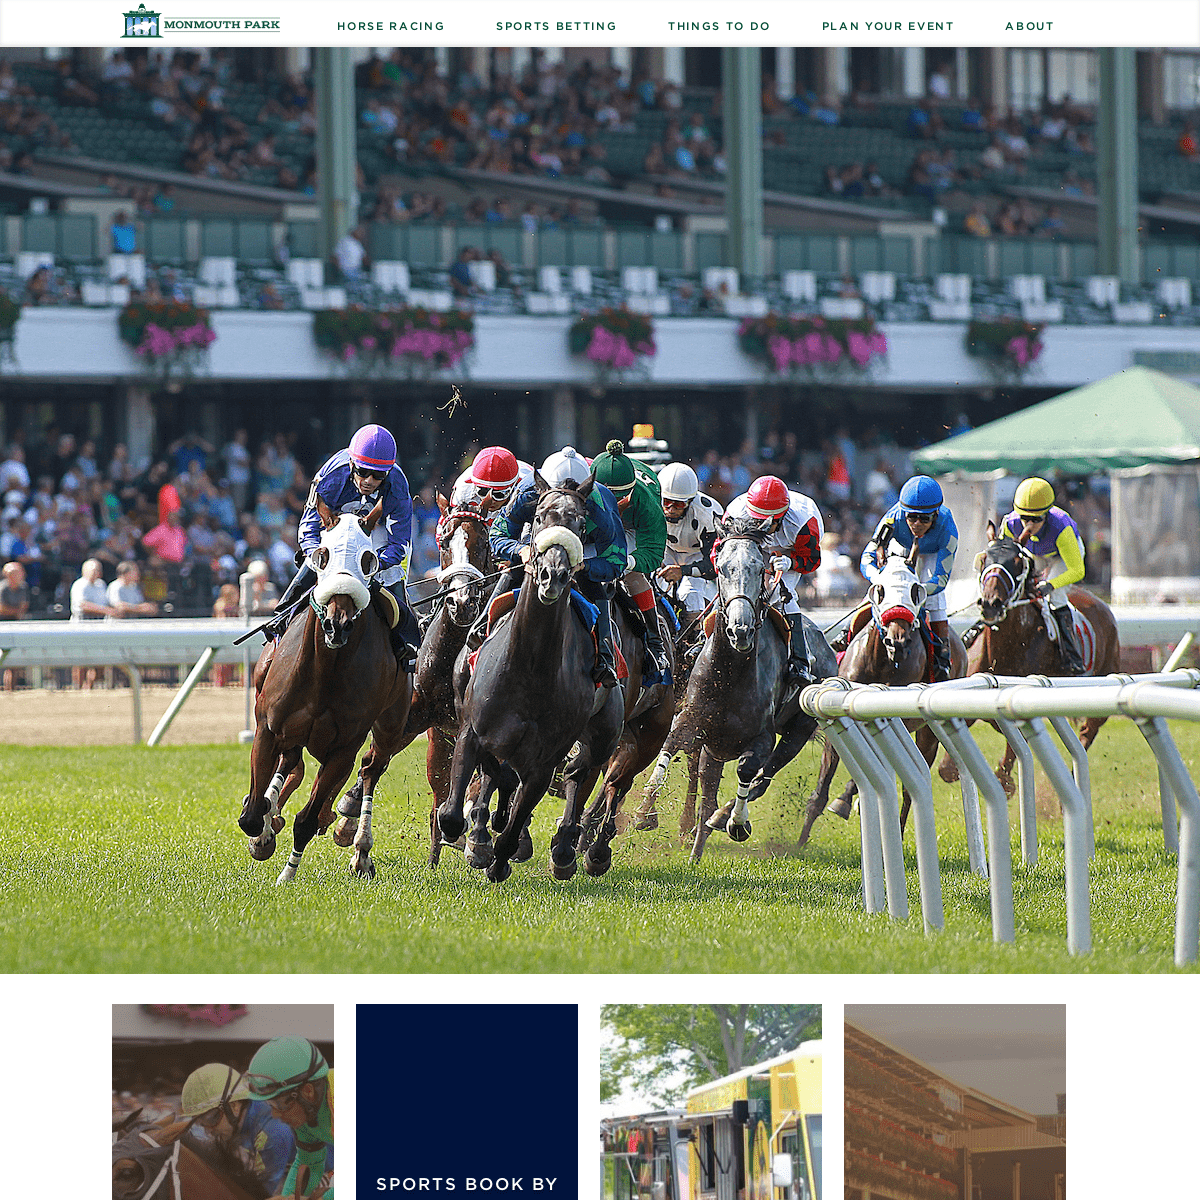 A complete backup of monmouthpark.com